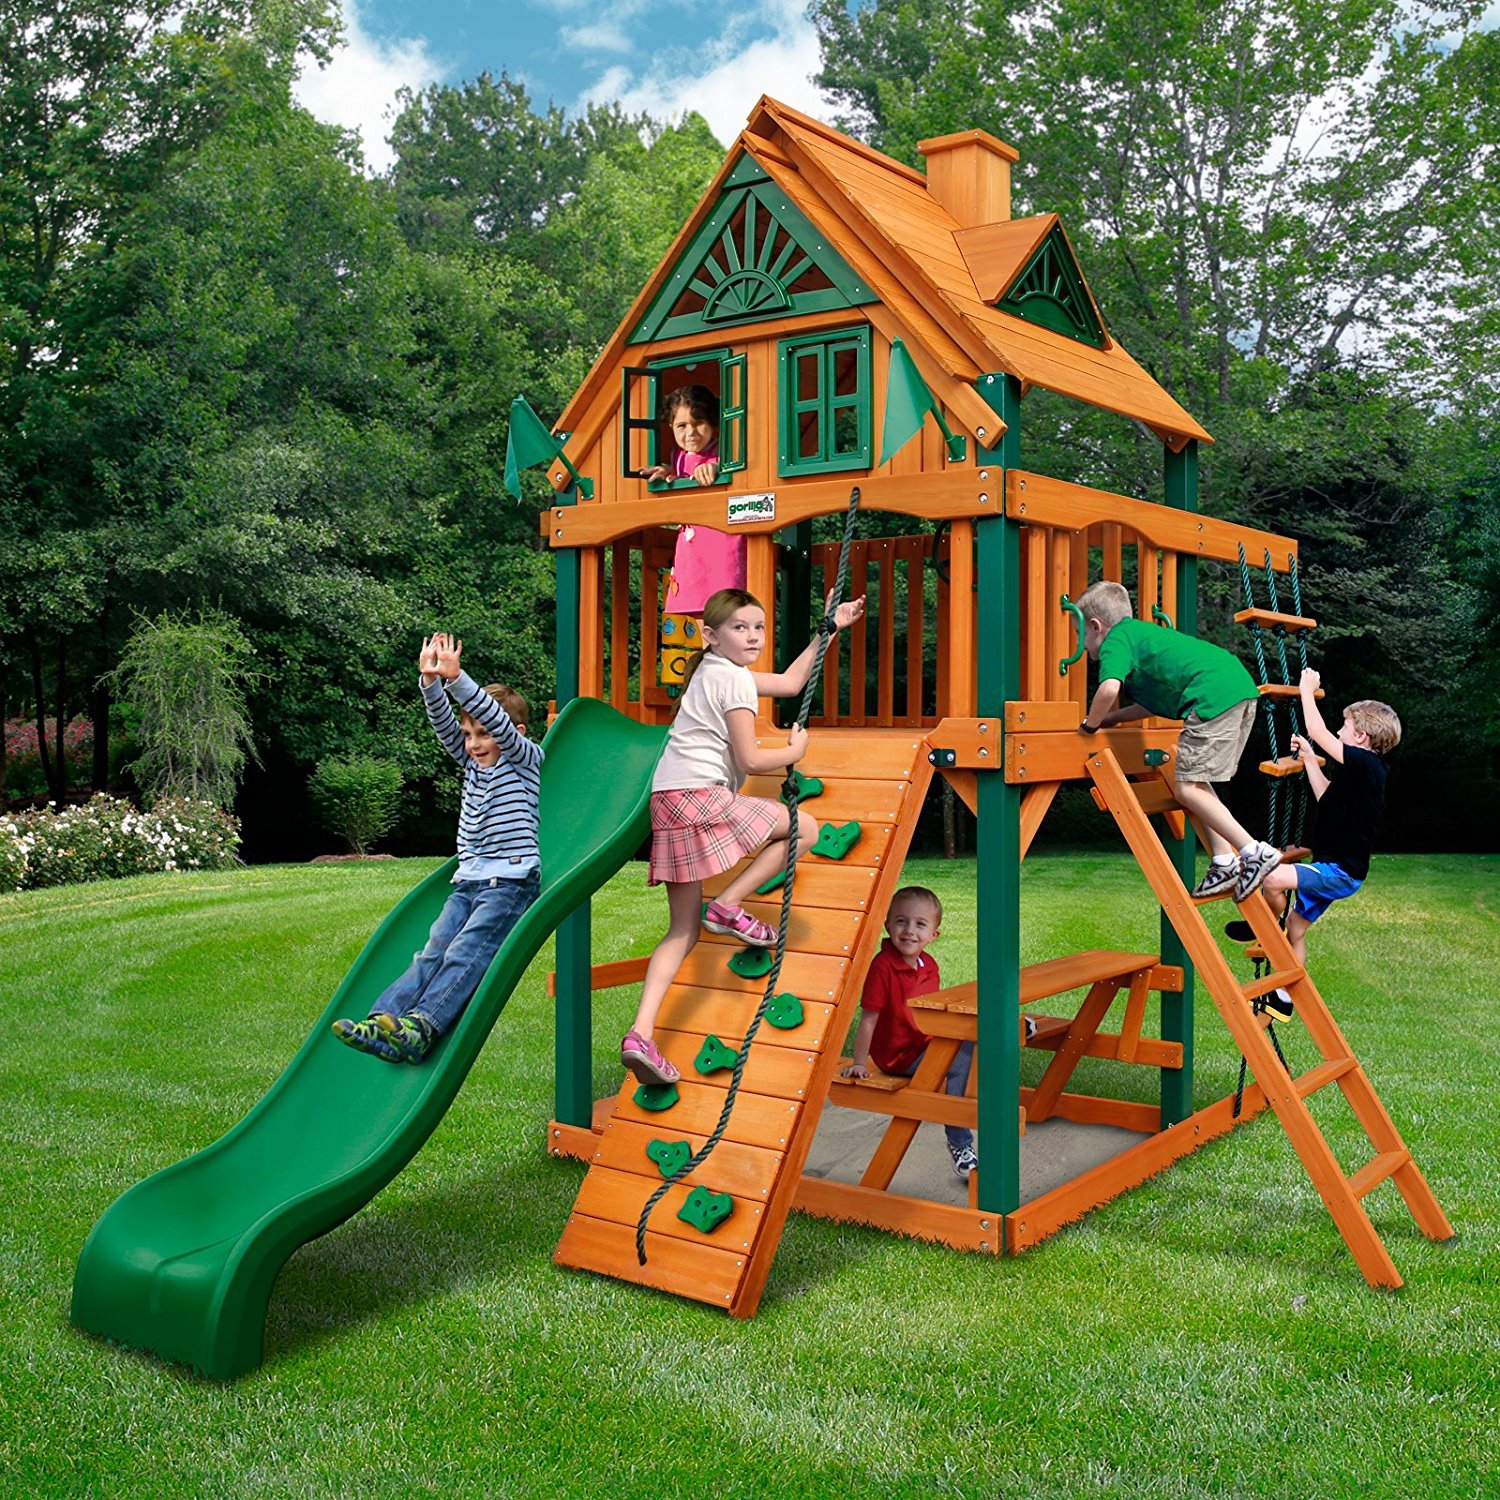 Swing Sets for Small Yards - The Backyard Site